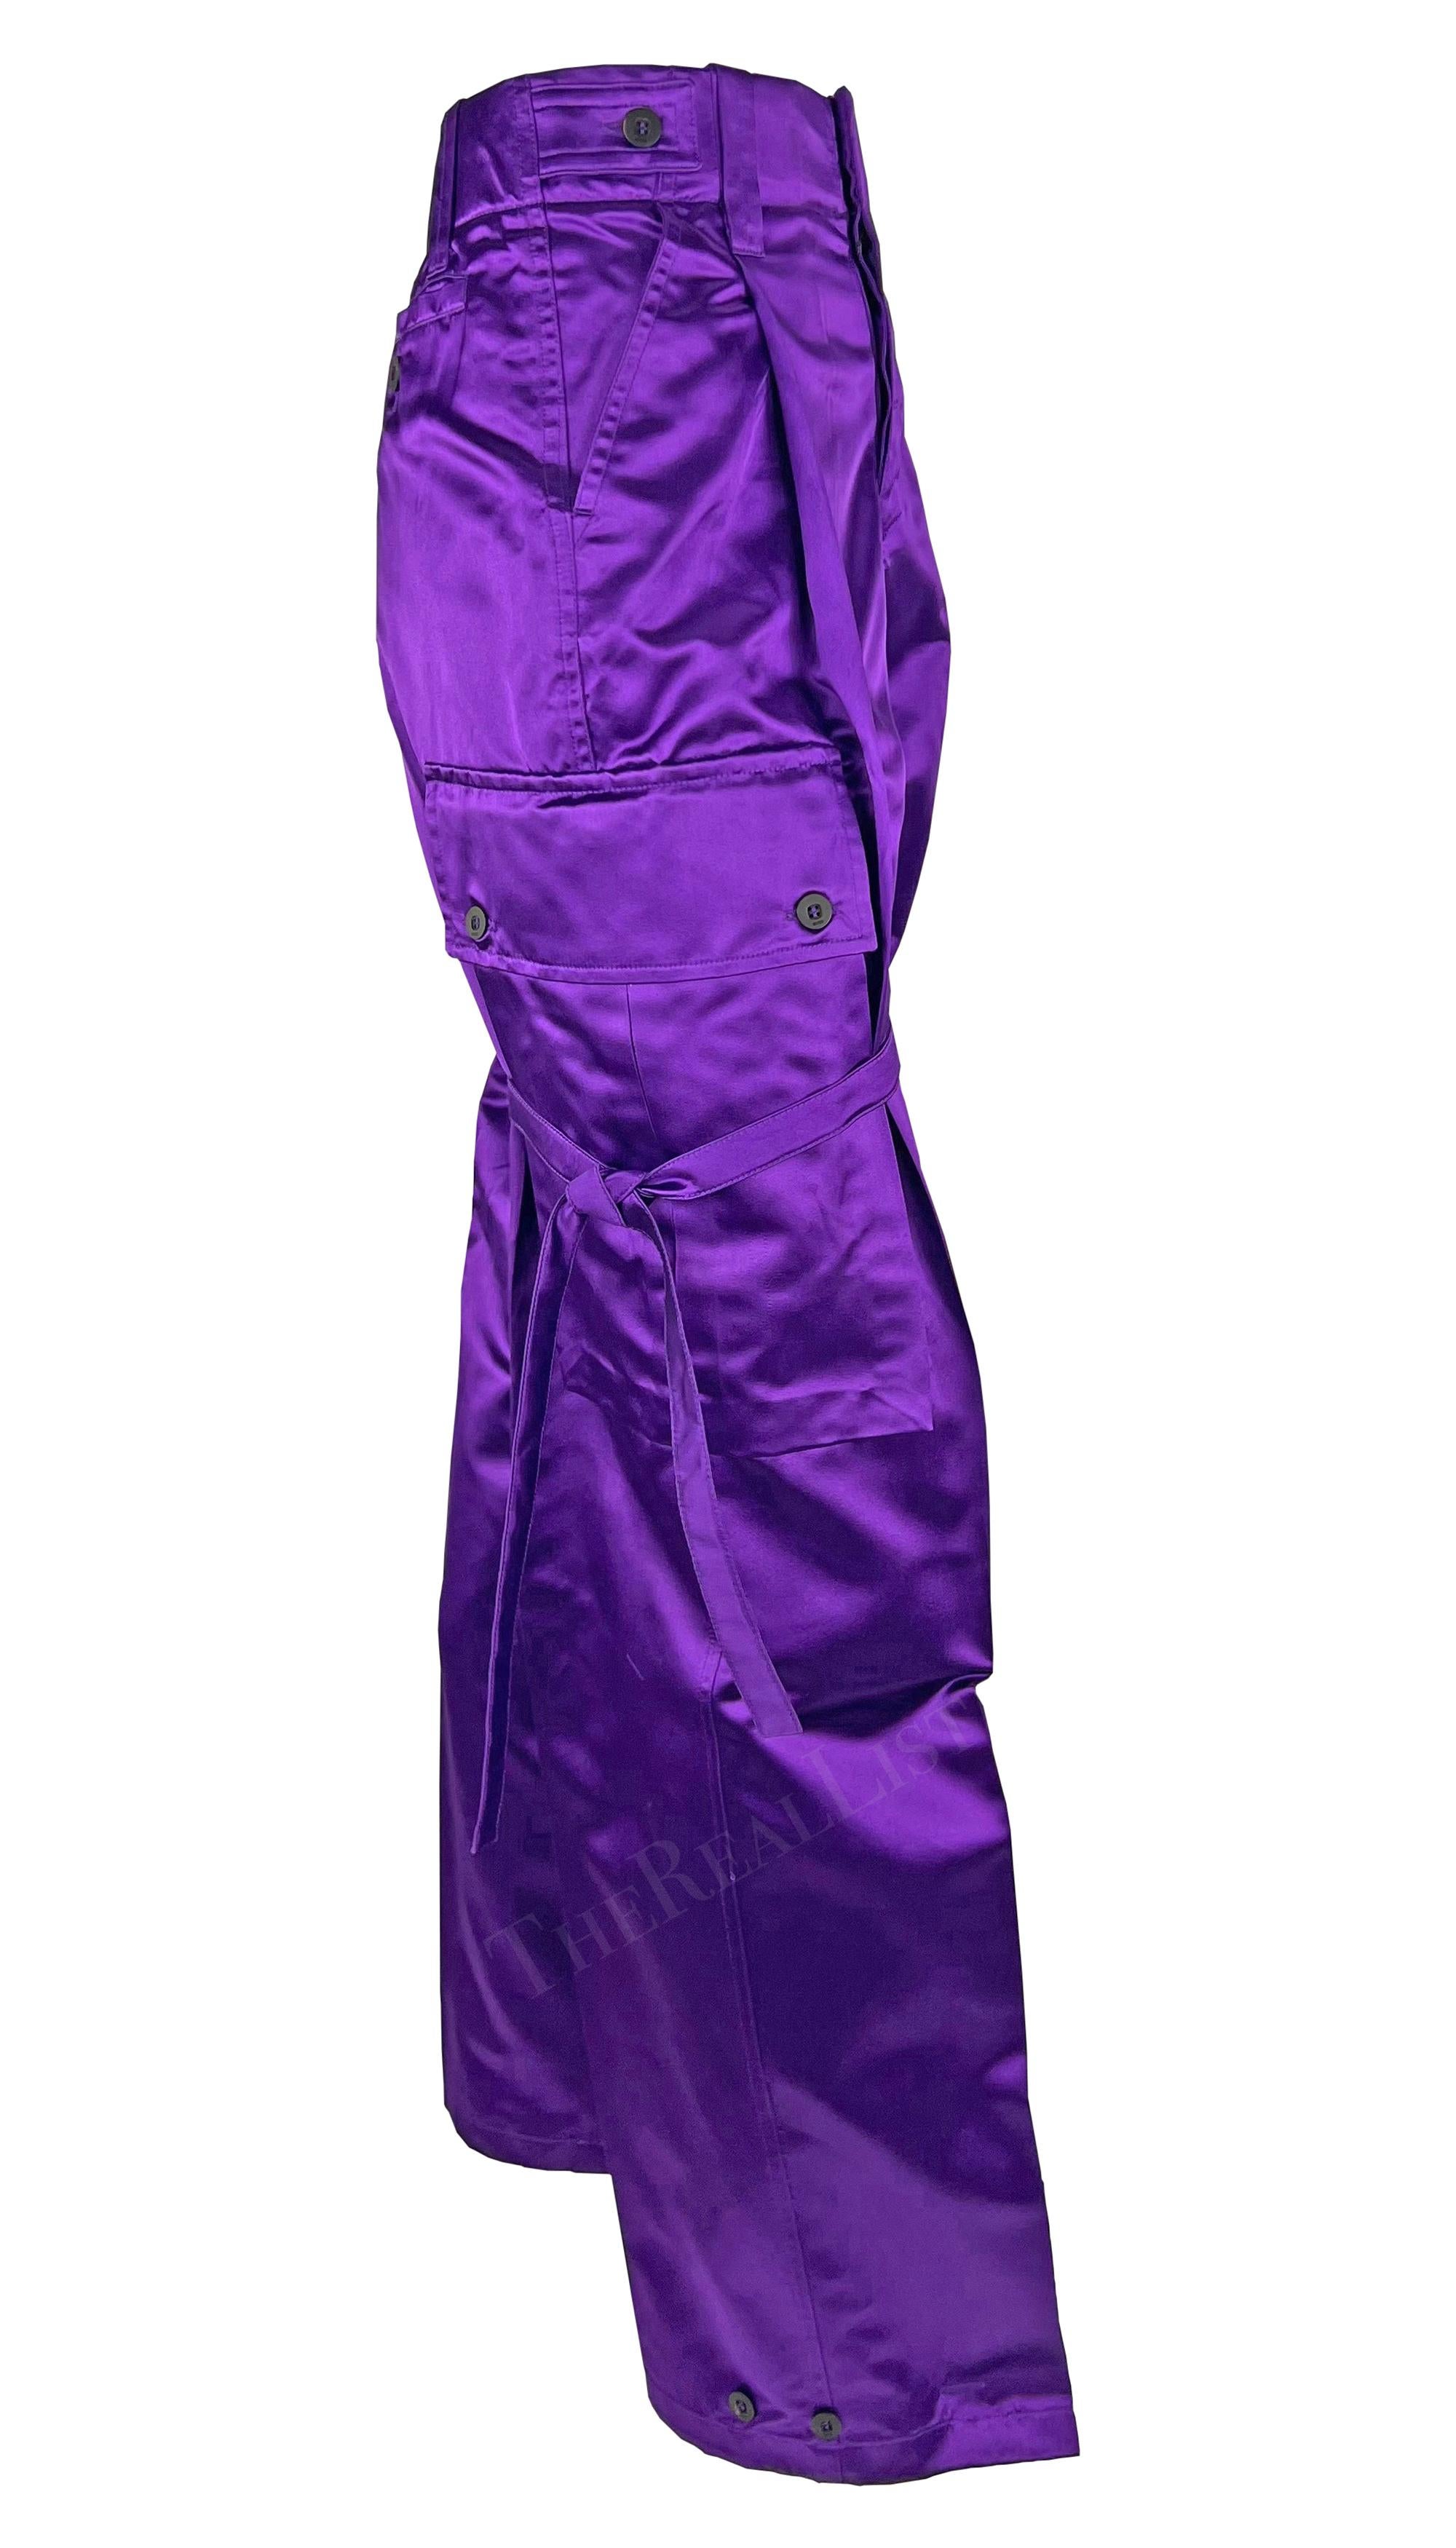 NWT S/S 2001 Gucci by Tom Ford Runway Purple Satin Tie Wide Leg Cargo Pants  For Sale 5